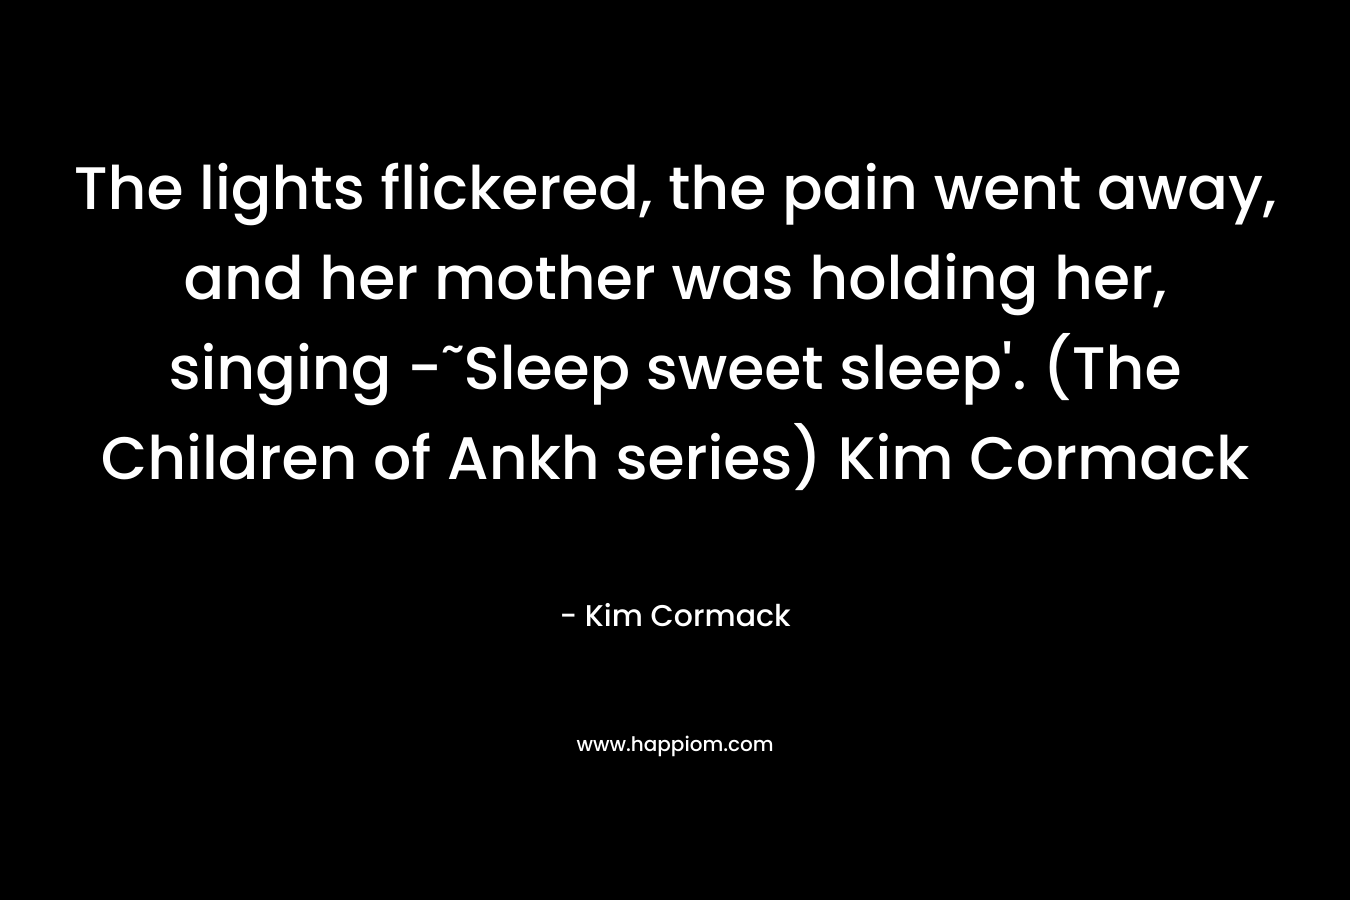 The lights flickered, the pain went away, and her mother was holding her, singing -˜Sleep sweet sleep’. (The Children of Ankh series) Kim Cormack – Kim Cormack